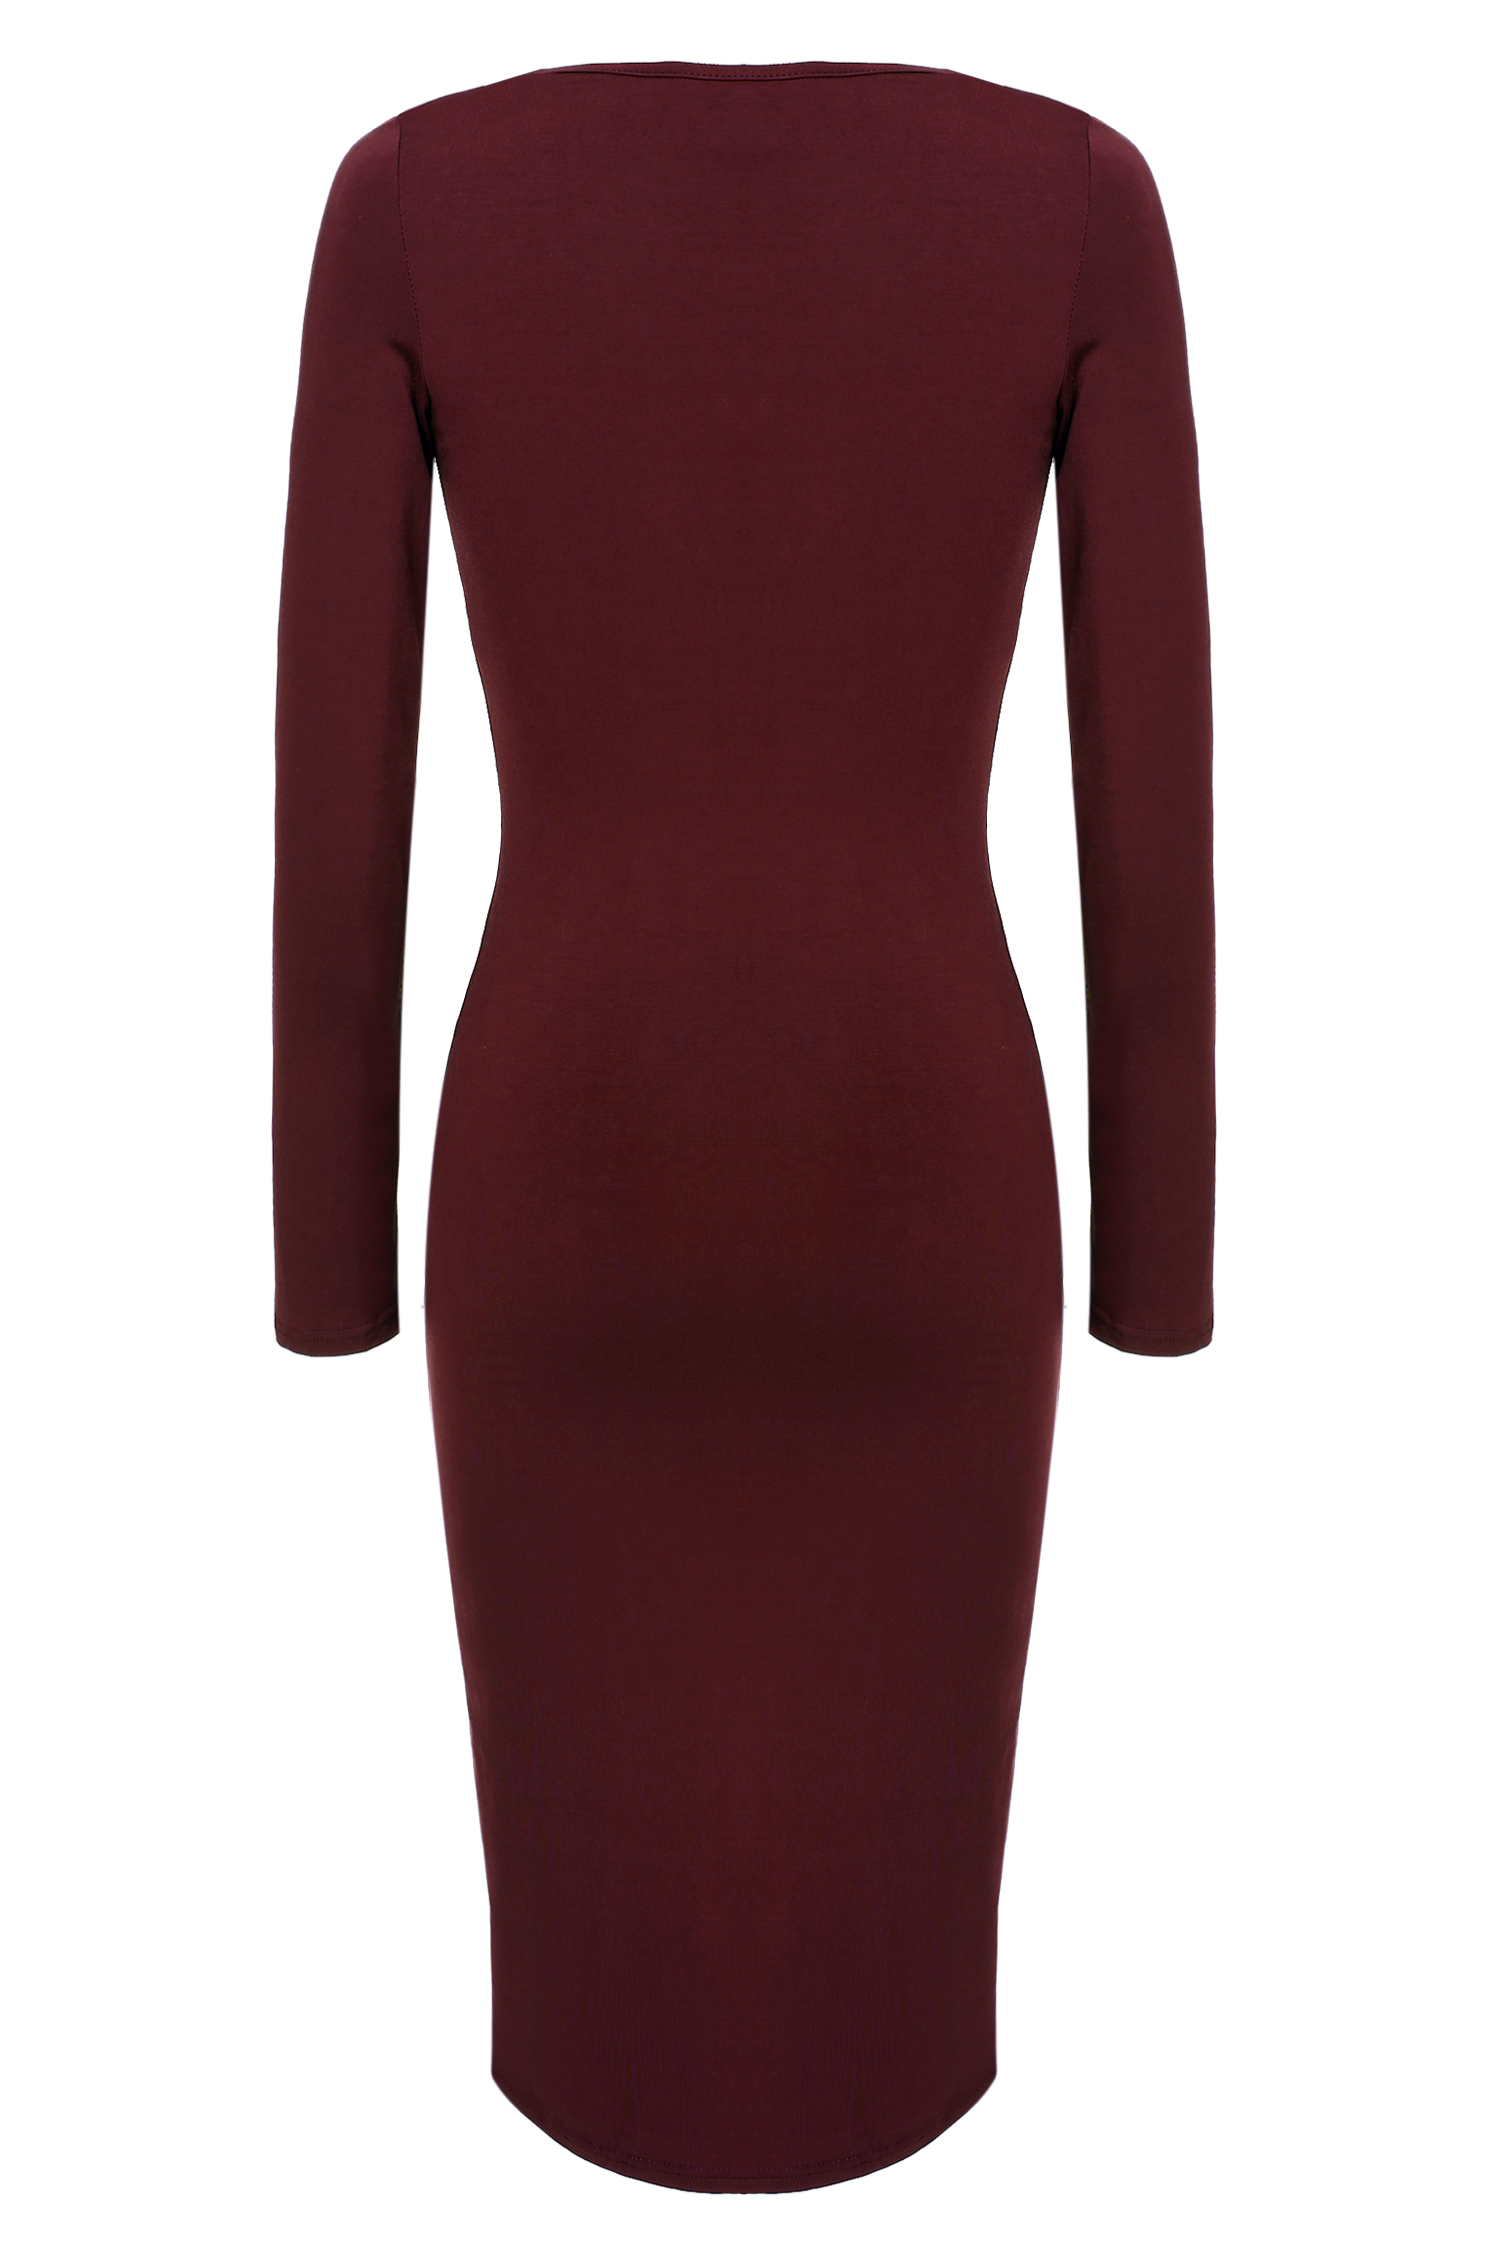 Skyling Women Casual O-Neck Long Sleeve Solid Bodycon Stretch Dress